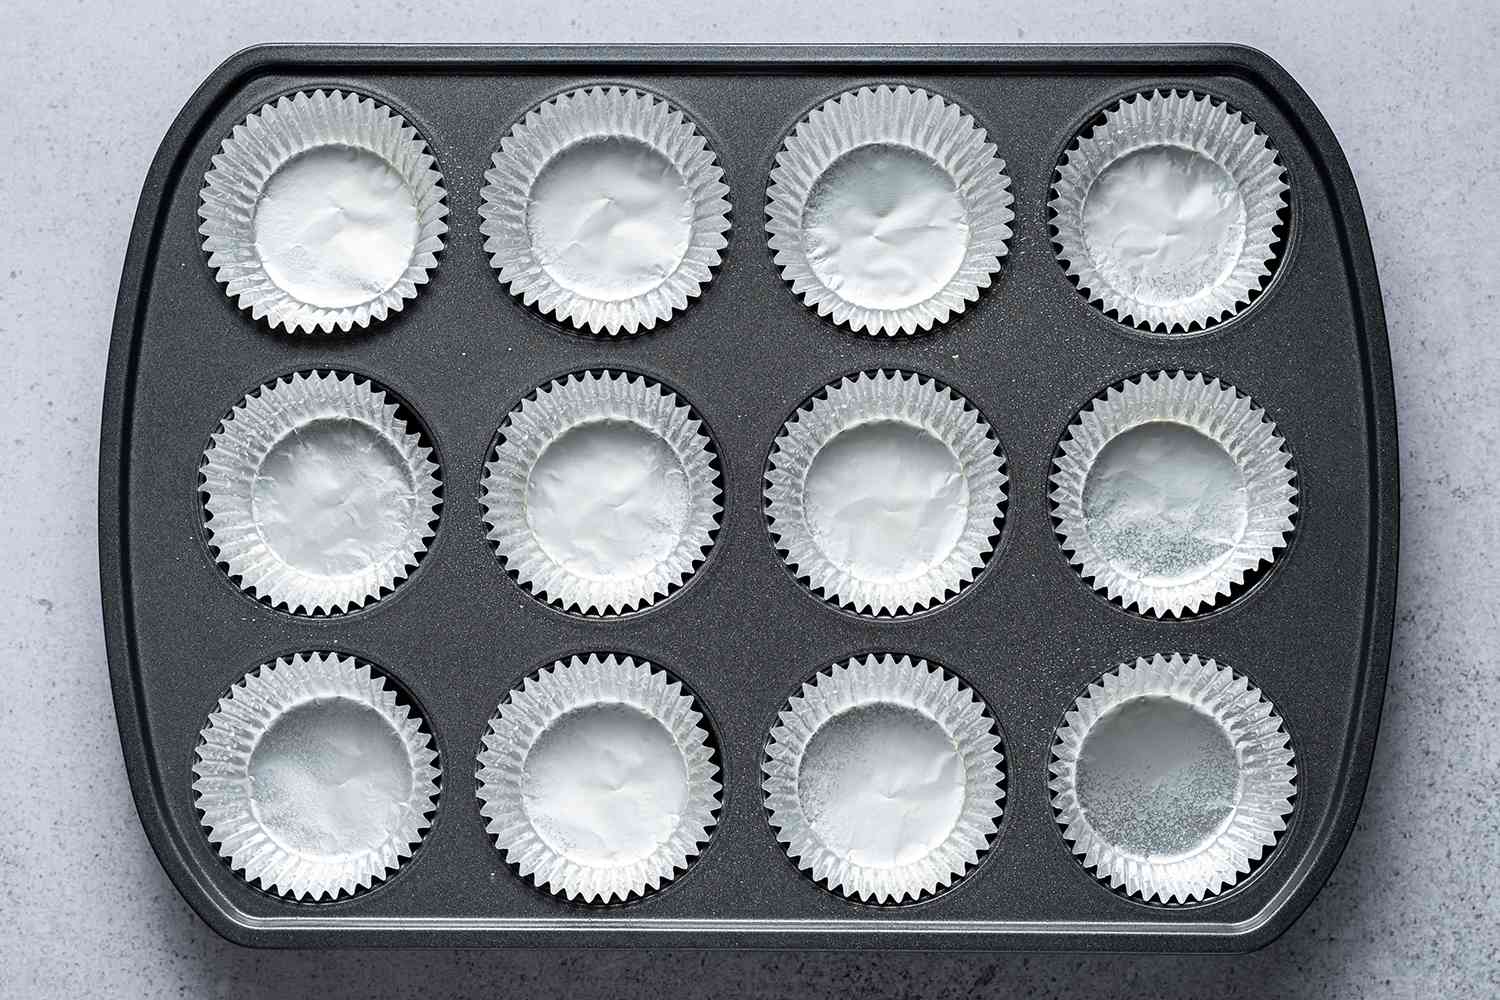 A muffin pan lined with liners